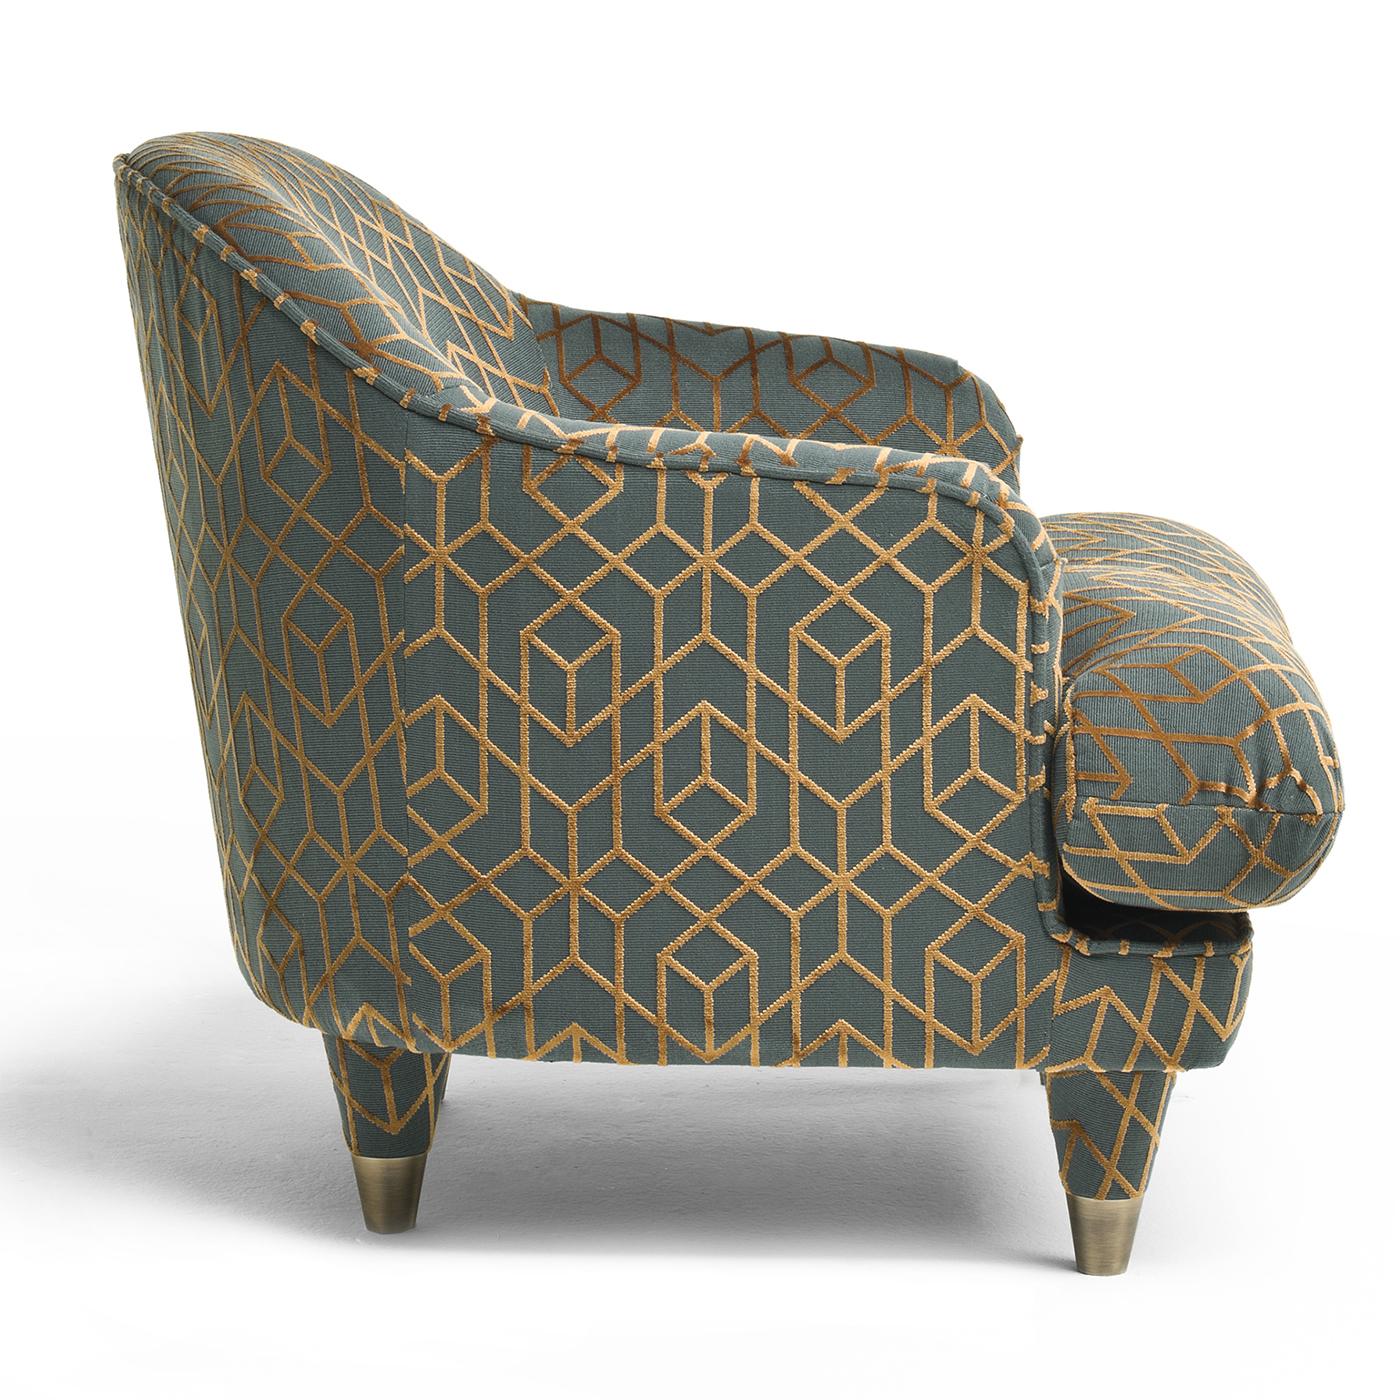 A chic contemporary take on a true classic, the Century Club Armchair is designed for pure comfort. In moody green upholstery with a copper geometric print, the chair is characterized by a large seat cushion, inviting you in for a long reading